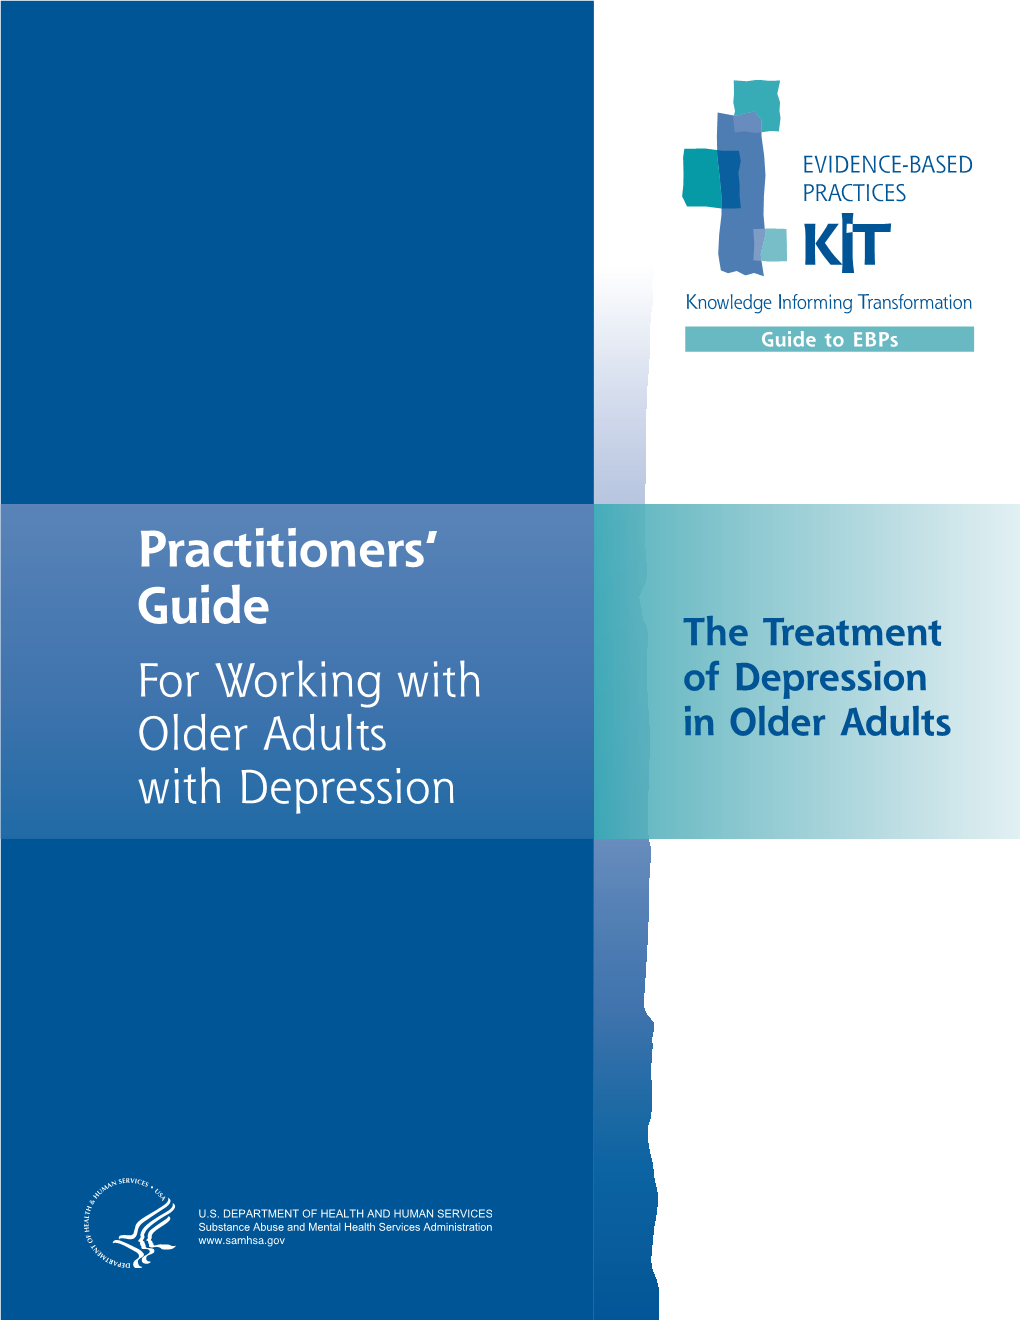 Practitioner's Guide for Working with Older Adults with Depression